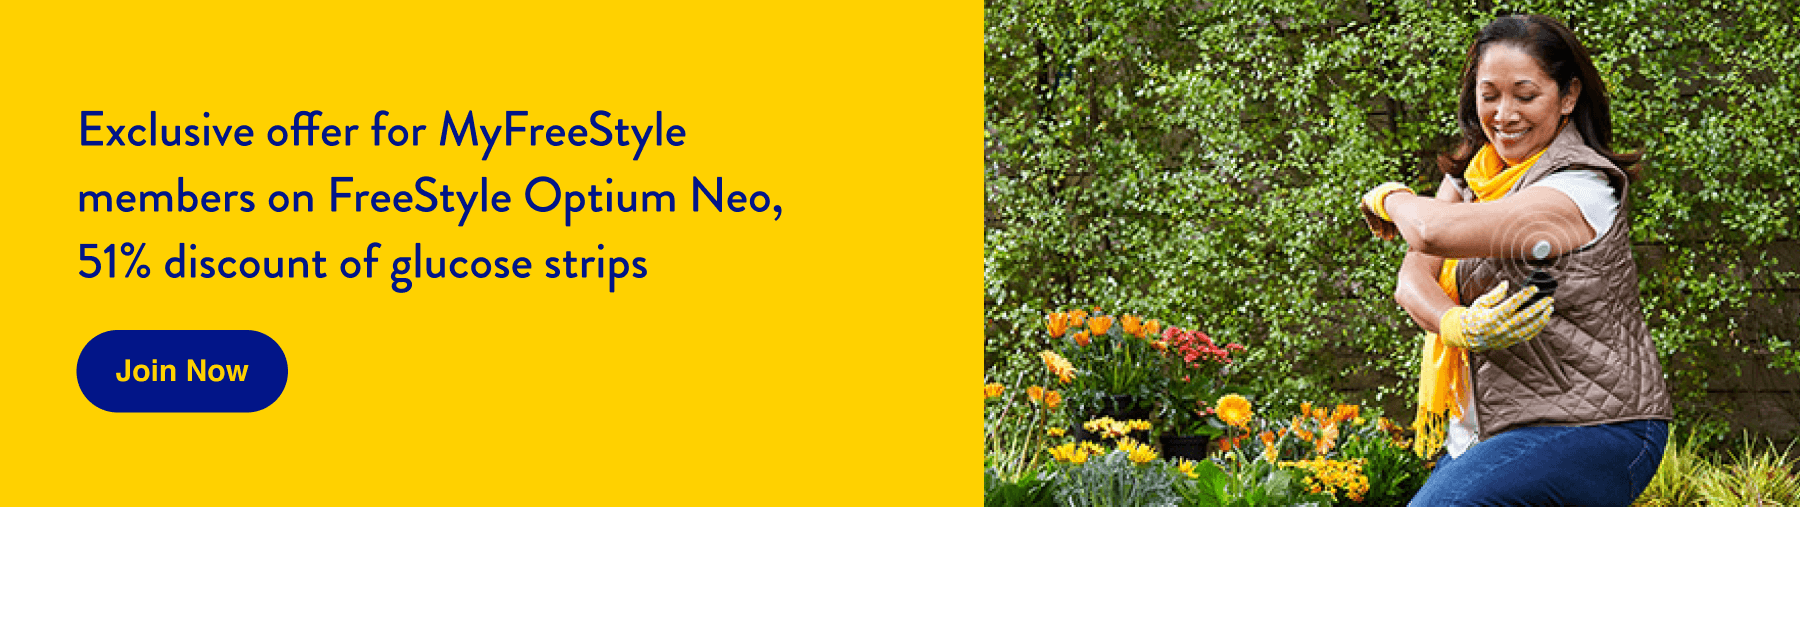 Exclusive offer for MyFreeStyle members on FreeStyle Optium Neo